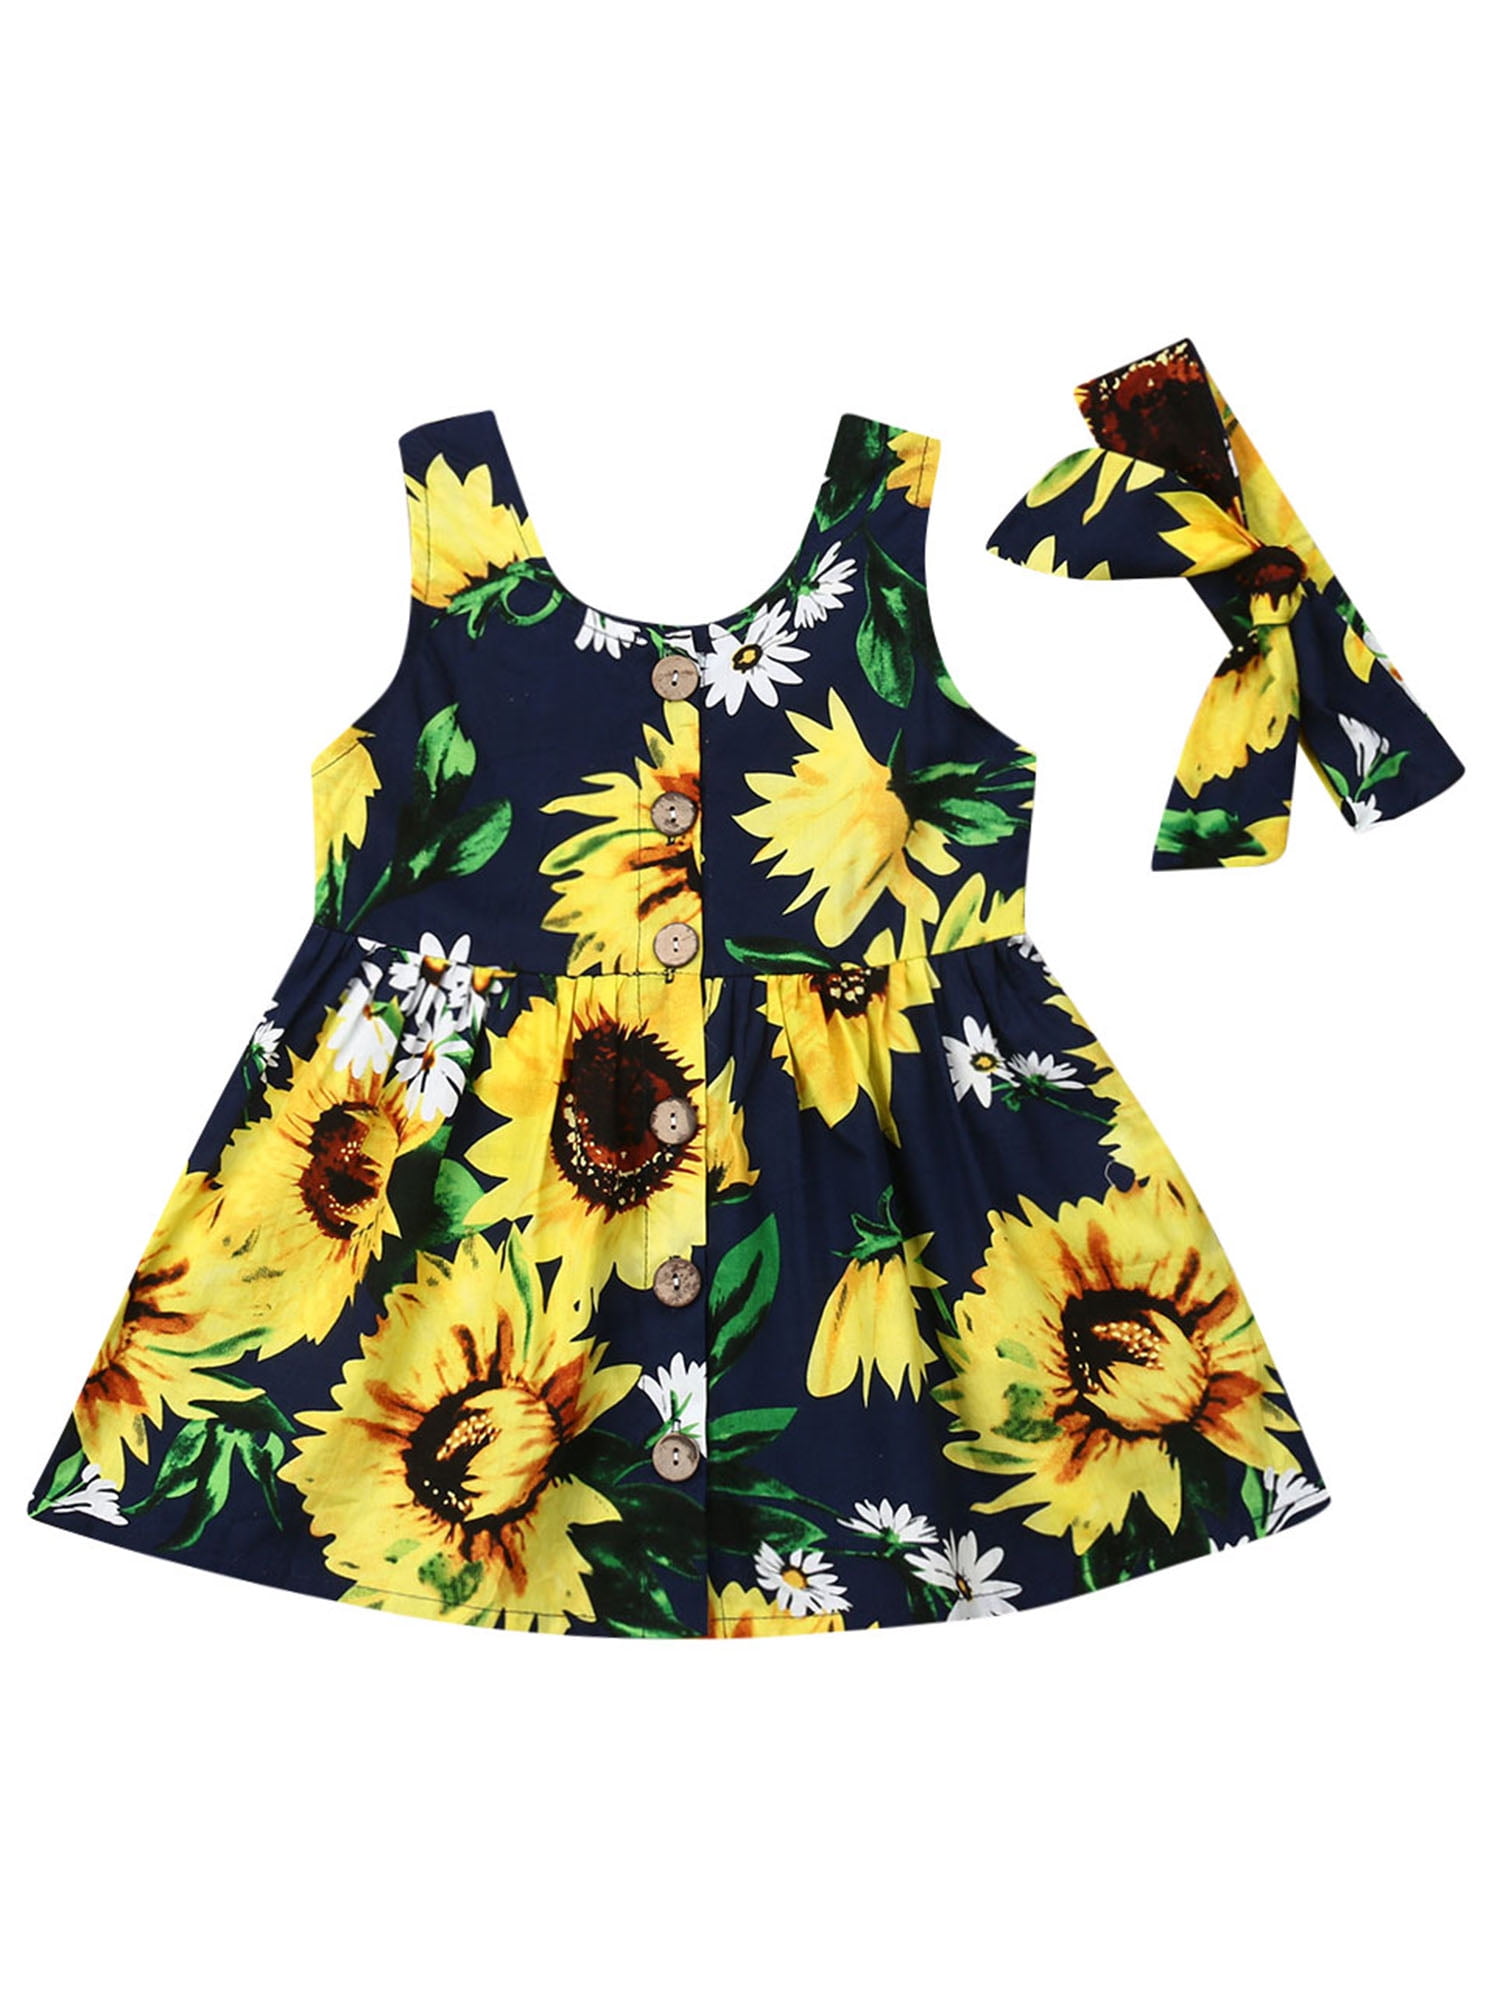 Kids Toddler Baby Girl Sunflower Backless Party Dress Casual Holiday Sundress 